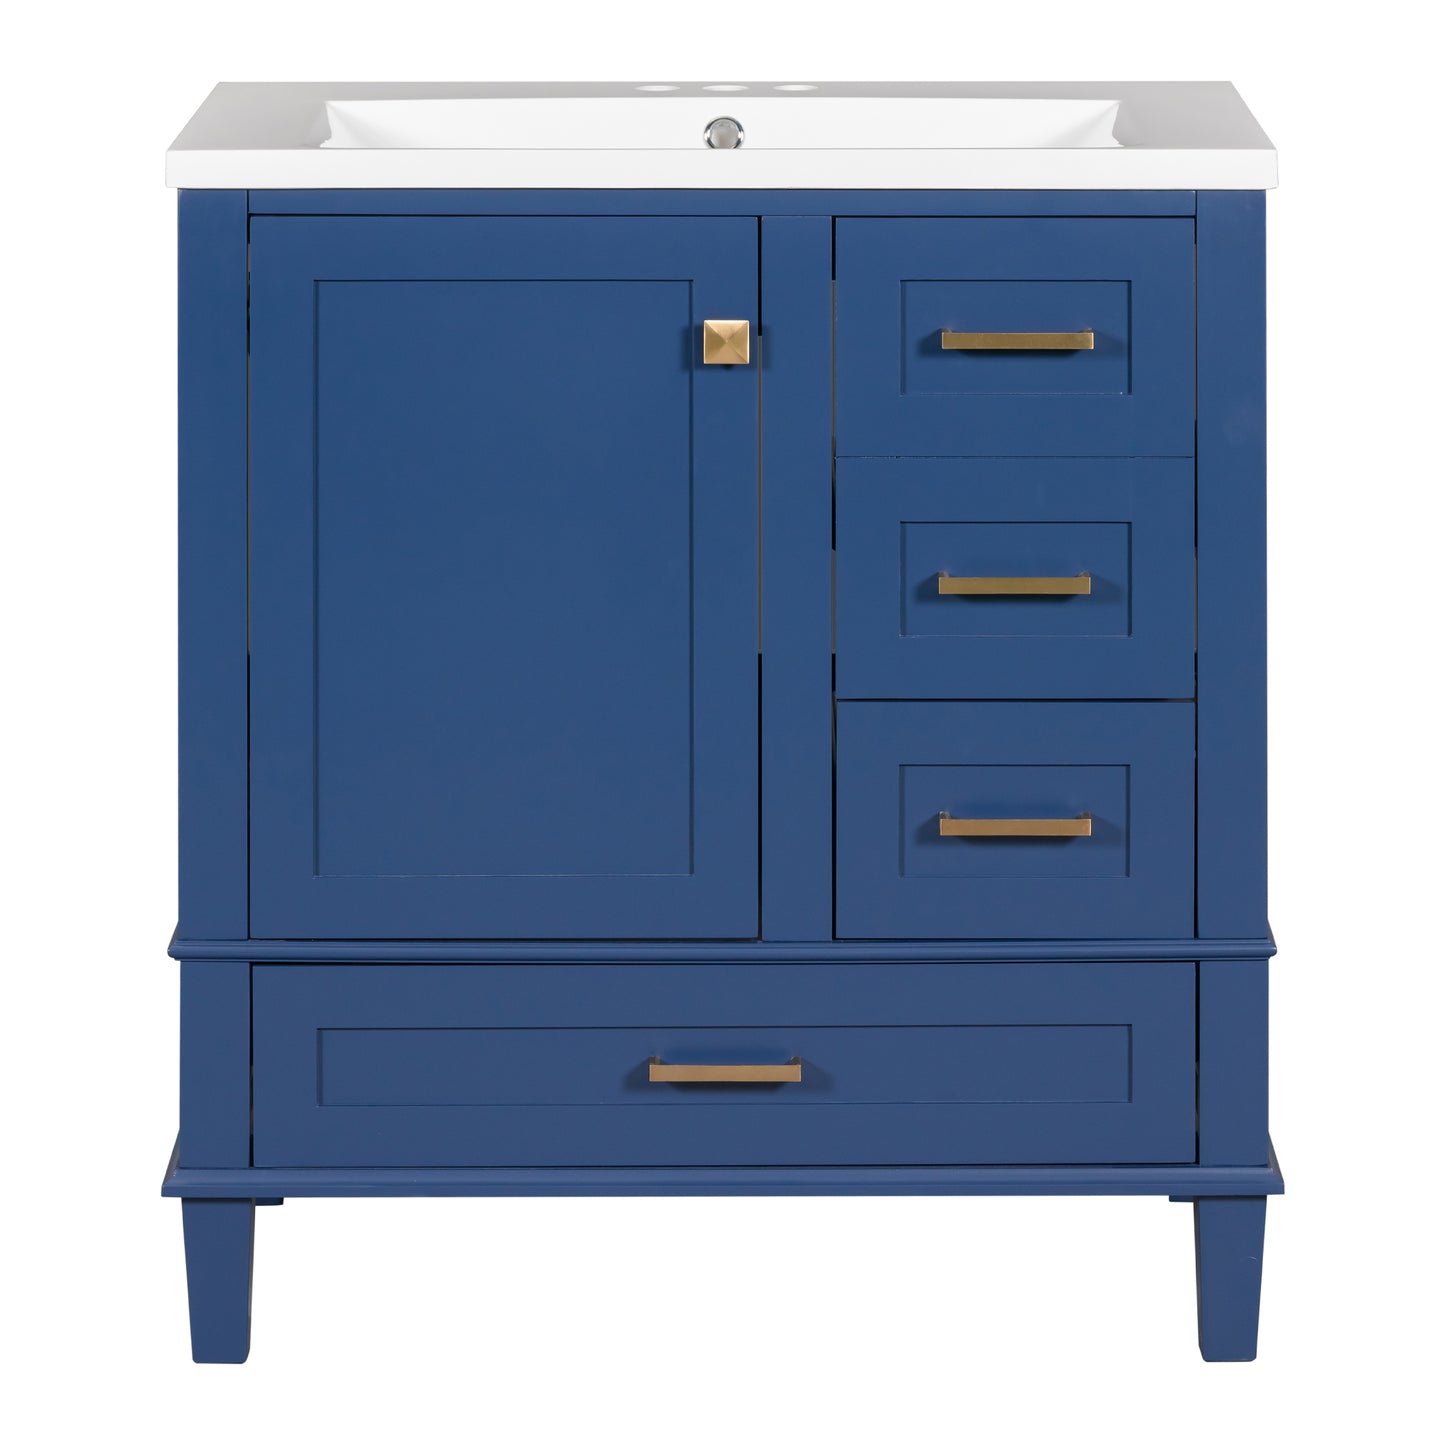 30" Bathroom Vanity , Modern Bathroom Cabinet with Sink Combo Set, Bathroom Storage Cabinet with a Soft Closing Door and 3 Drawers, Solid Wood Frame(Blue)